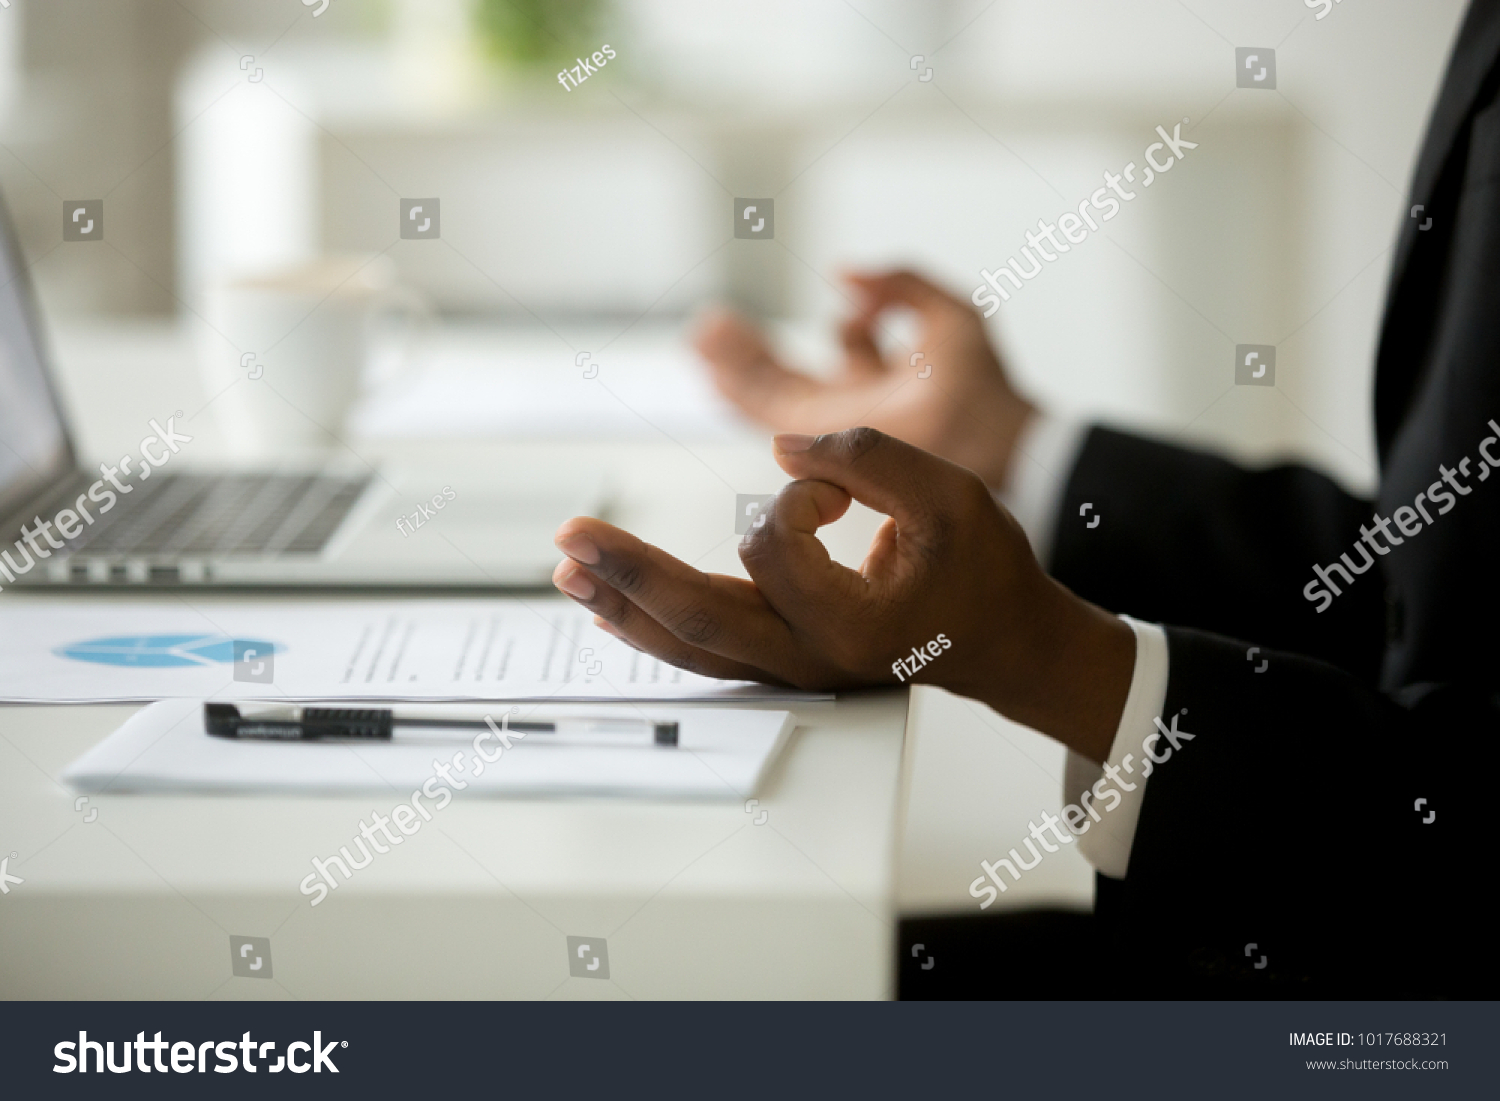 African american calm businessman relaxing meditating in office, peaceful ceo in suit practicing yoga at work, focus on black man hands in mudra, successful mindful people habits concept, close up #1017688321